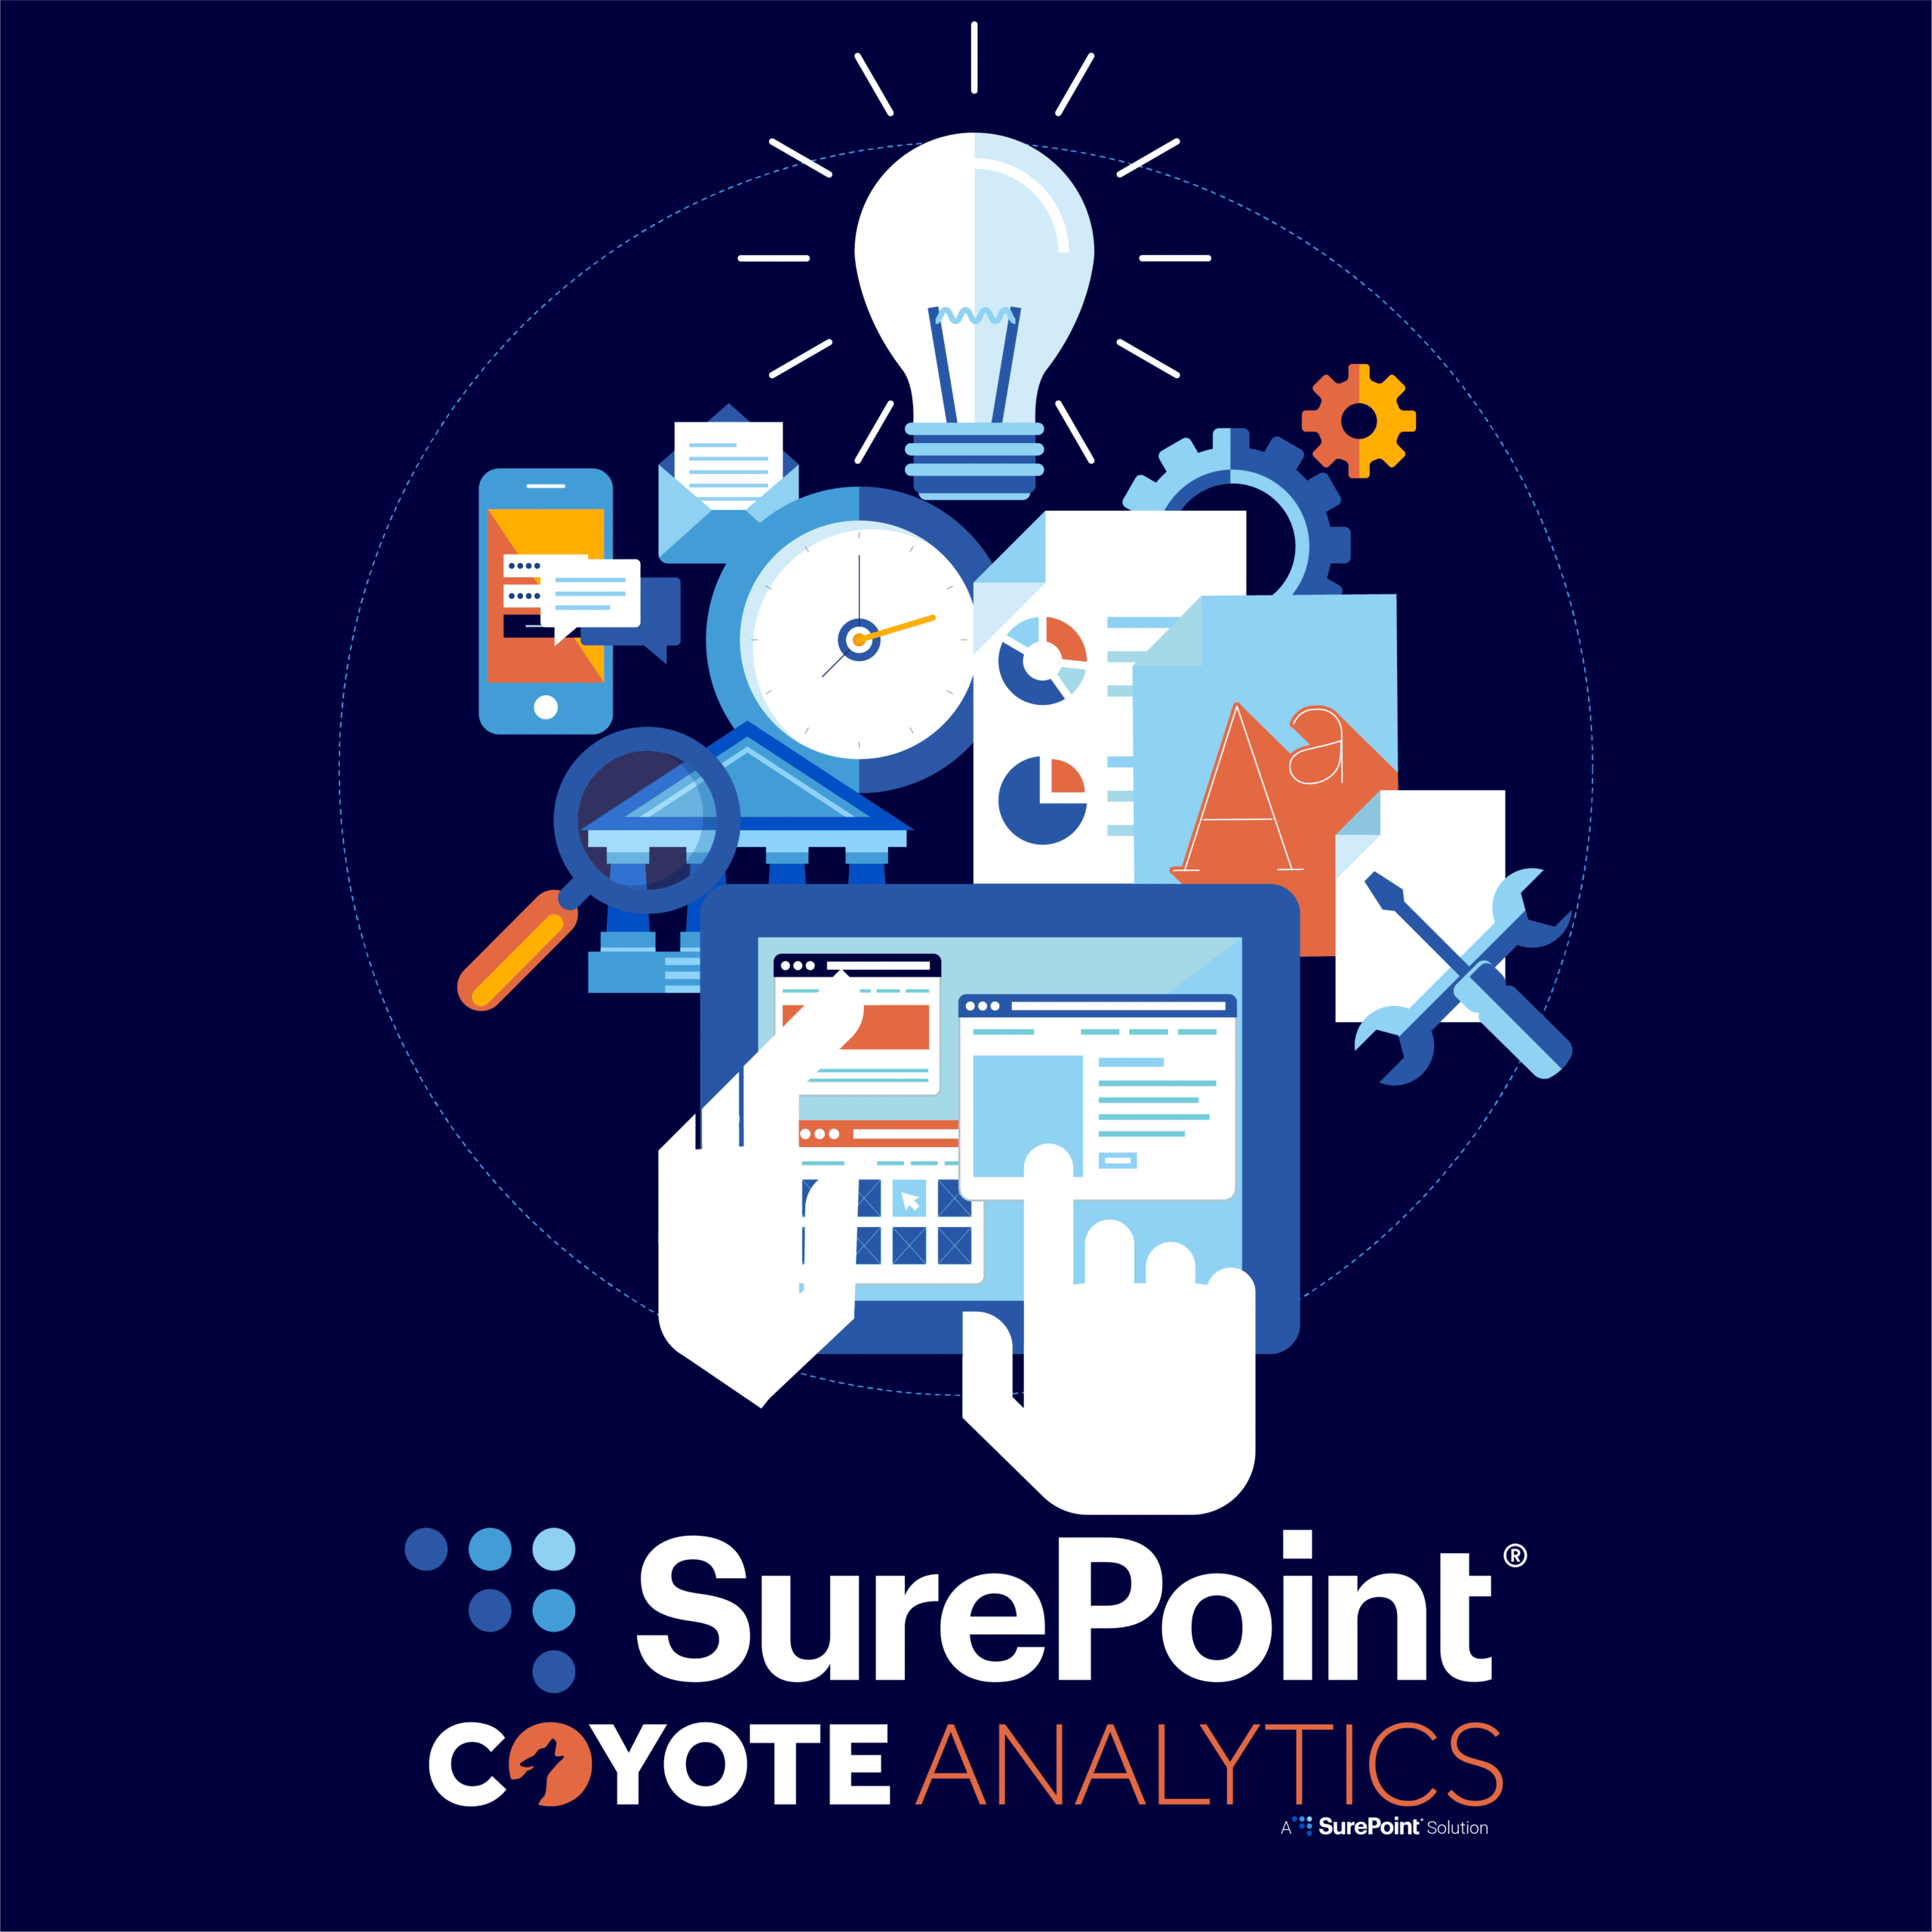 Coyote Analytics is Now Available in the Cloud